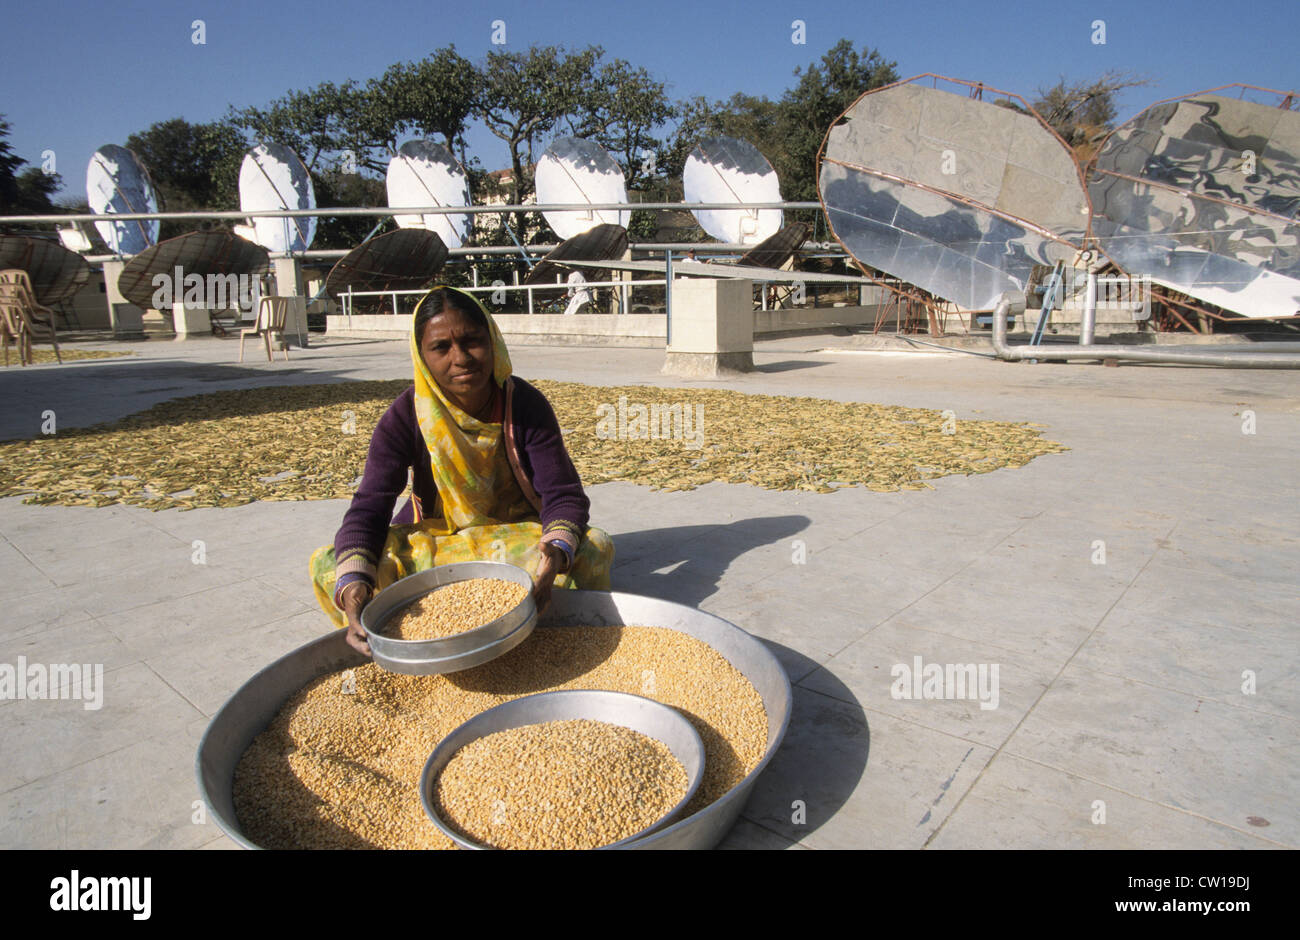 INDIA Rajasthan Mount Abu , Solar cooker system with parabolic concentrators in Brahma Kumari Ashram, the processed steam is used in the kitchen to prepare 20.000 meals daily Stock Photo